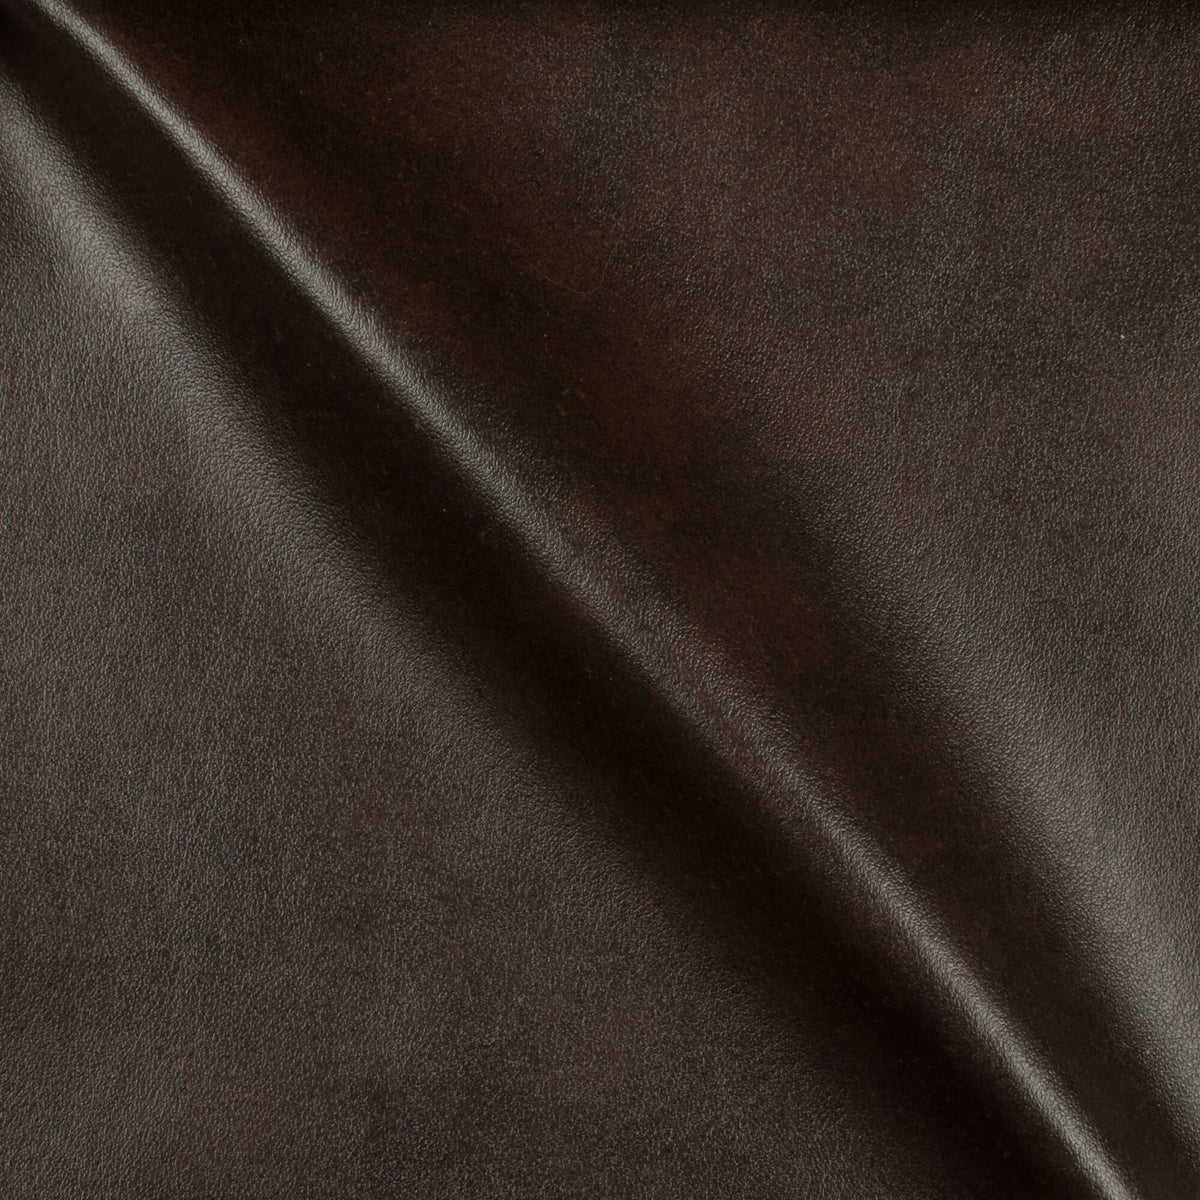 Umber Brown Self Textured Exclusive Sofa Fabric (Width 54 Inches)